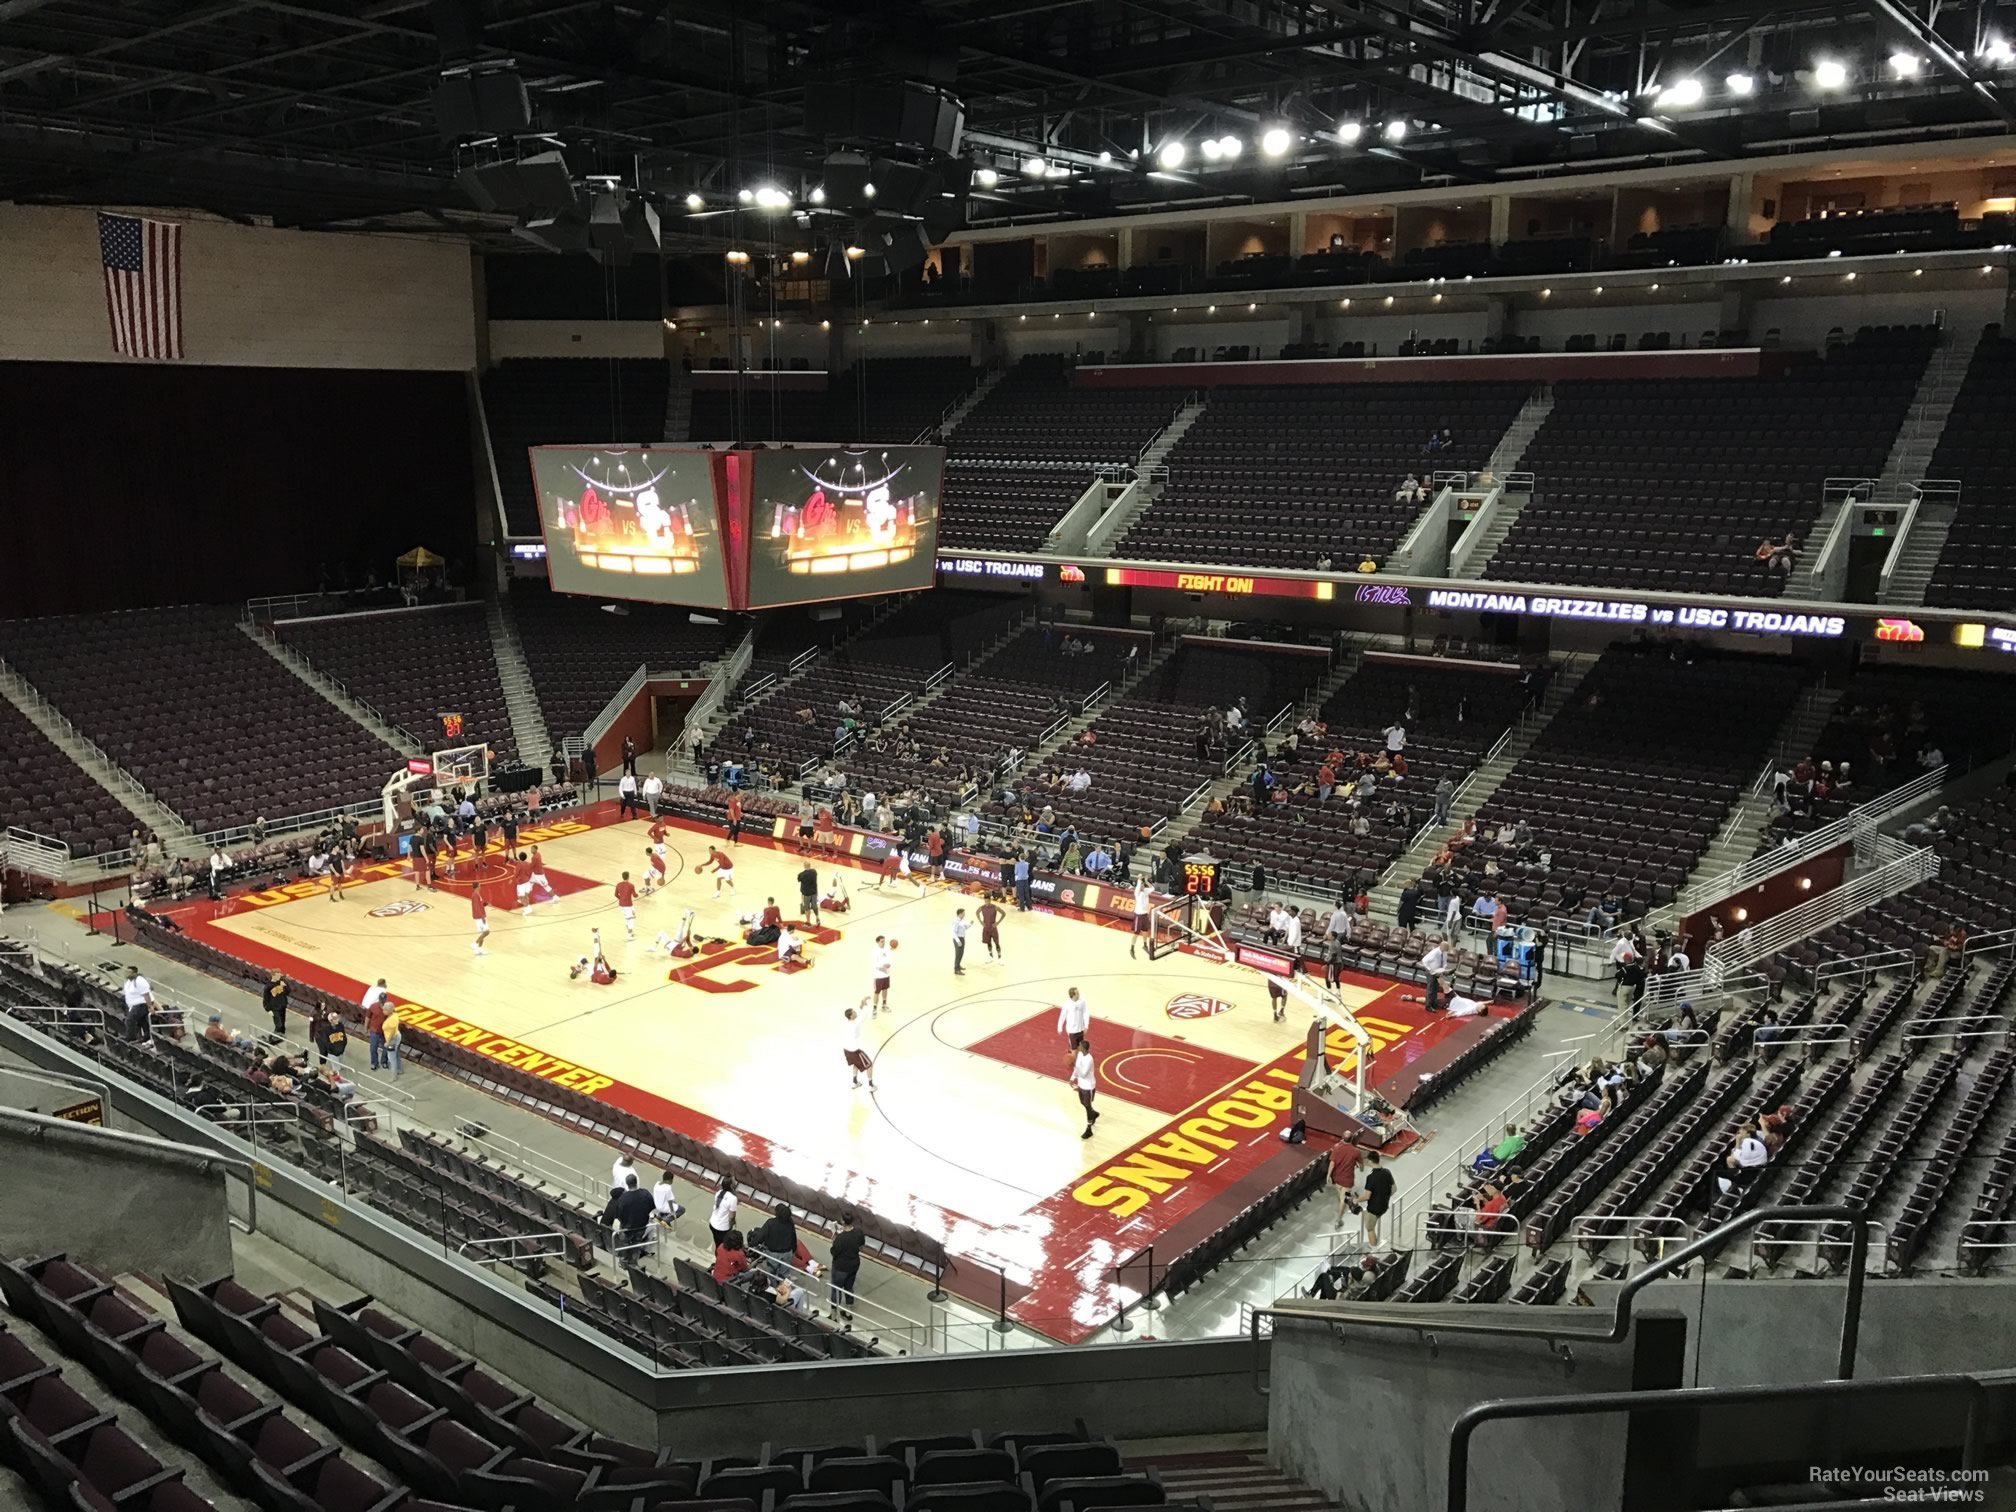 Section 208 at Galen Center